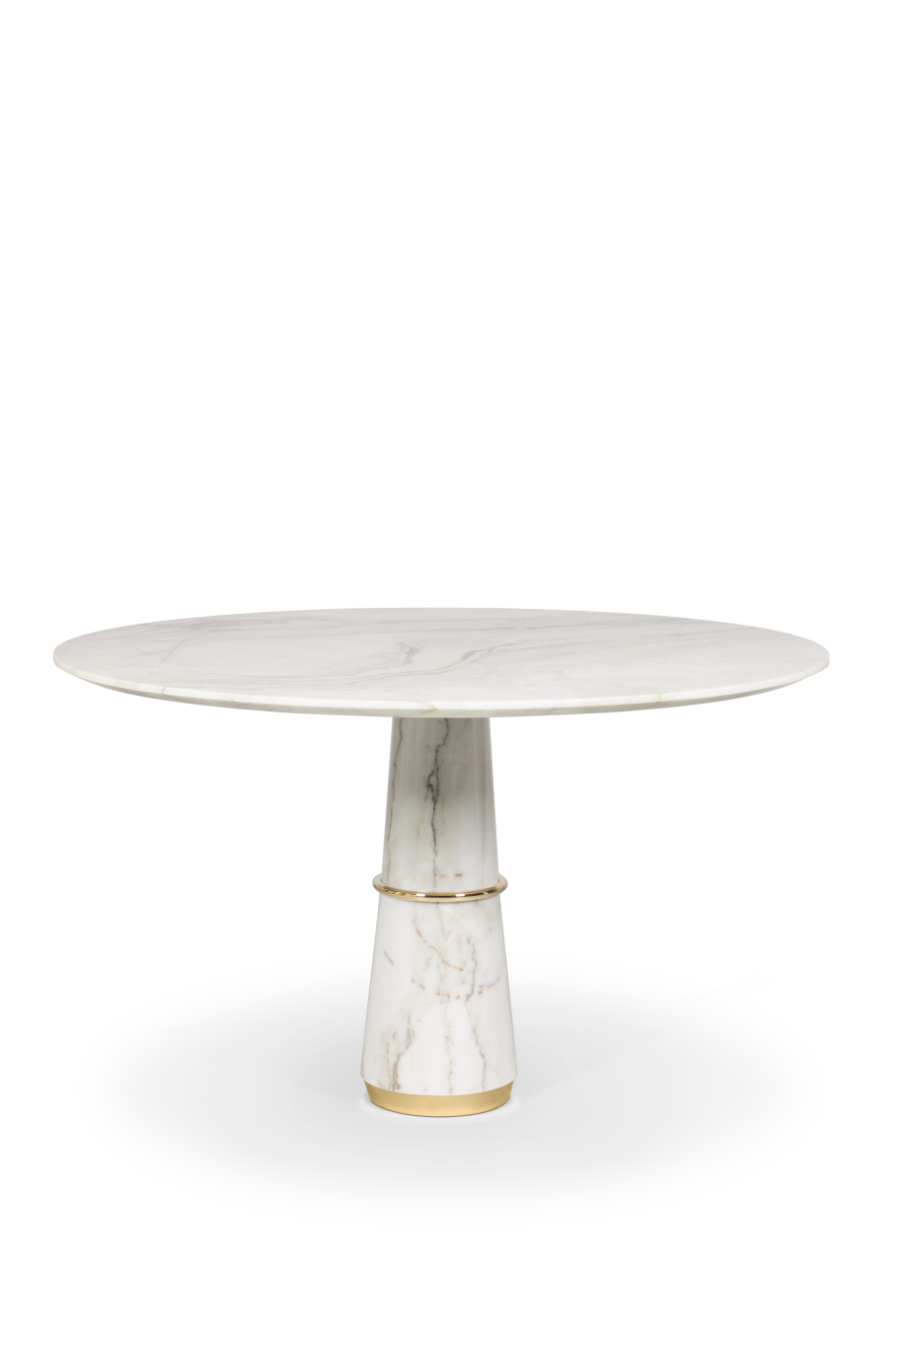 Tables: The Pillars of Interior Design tables Tables: The Pillars of Interior Design BRABBU AGRA DINNING TABLE 2 2